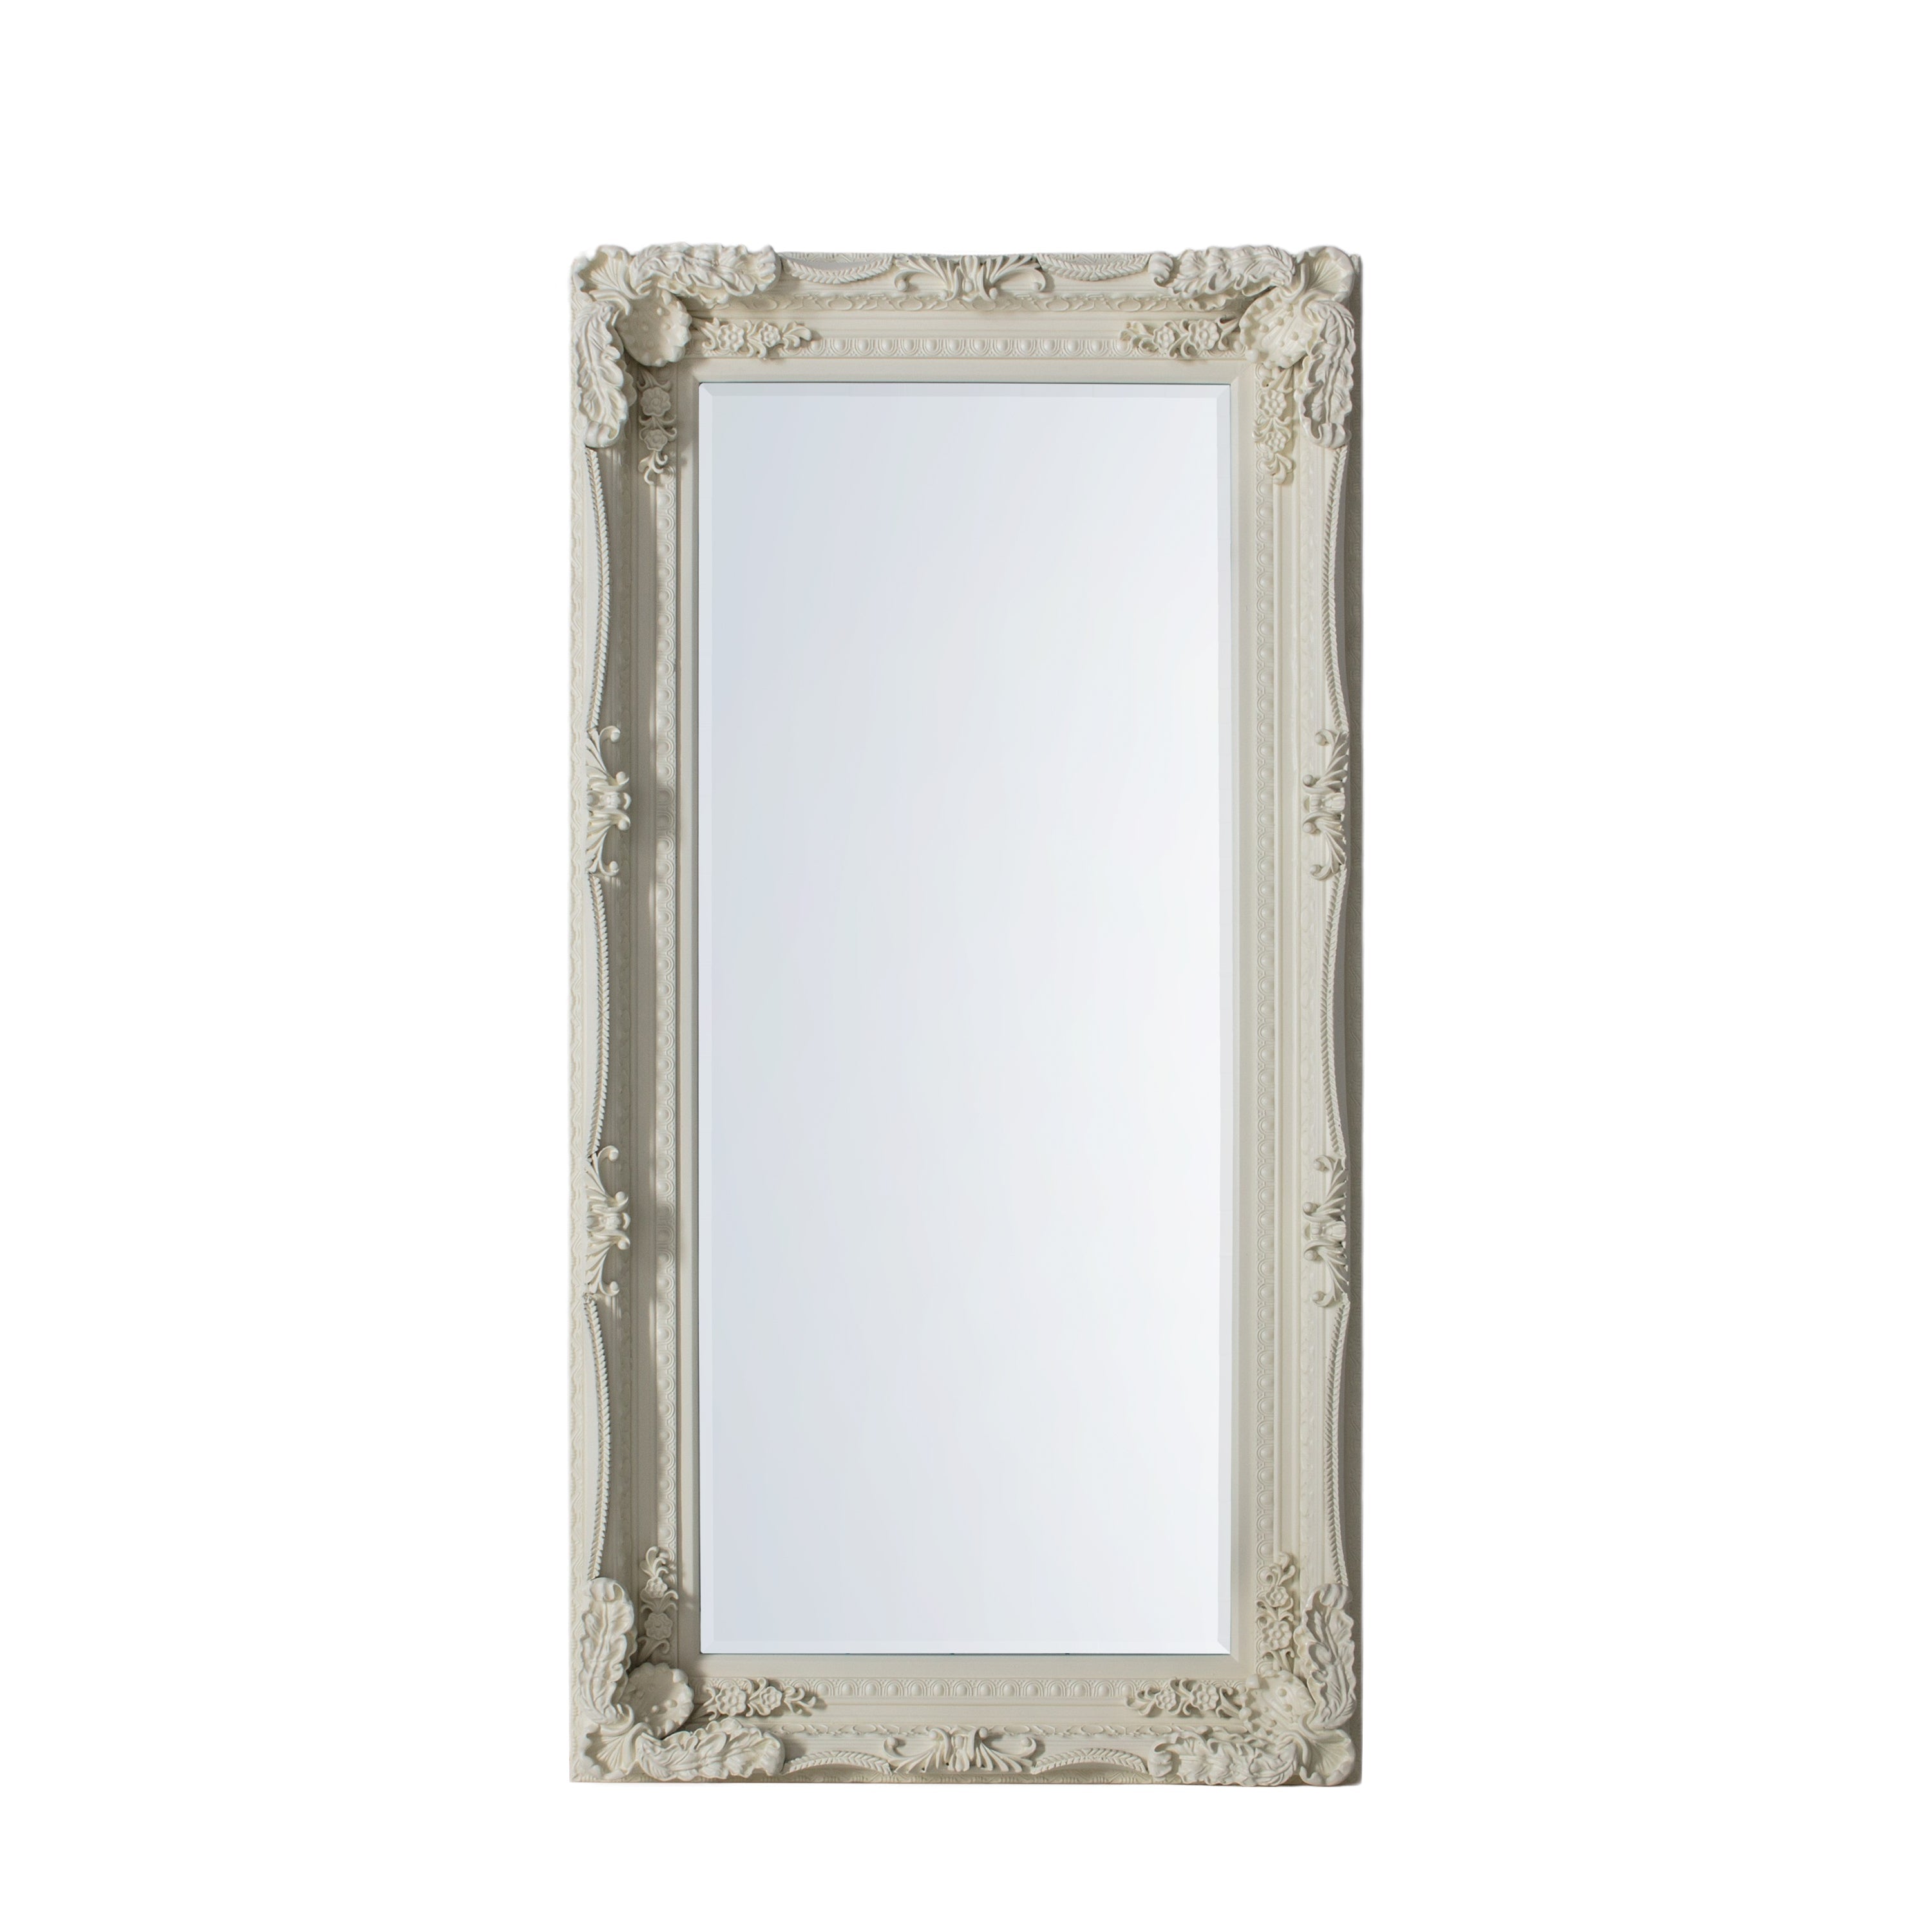 Carved Louis Leaner Mirror Cream 1755x895mm